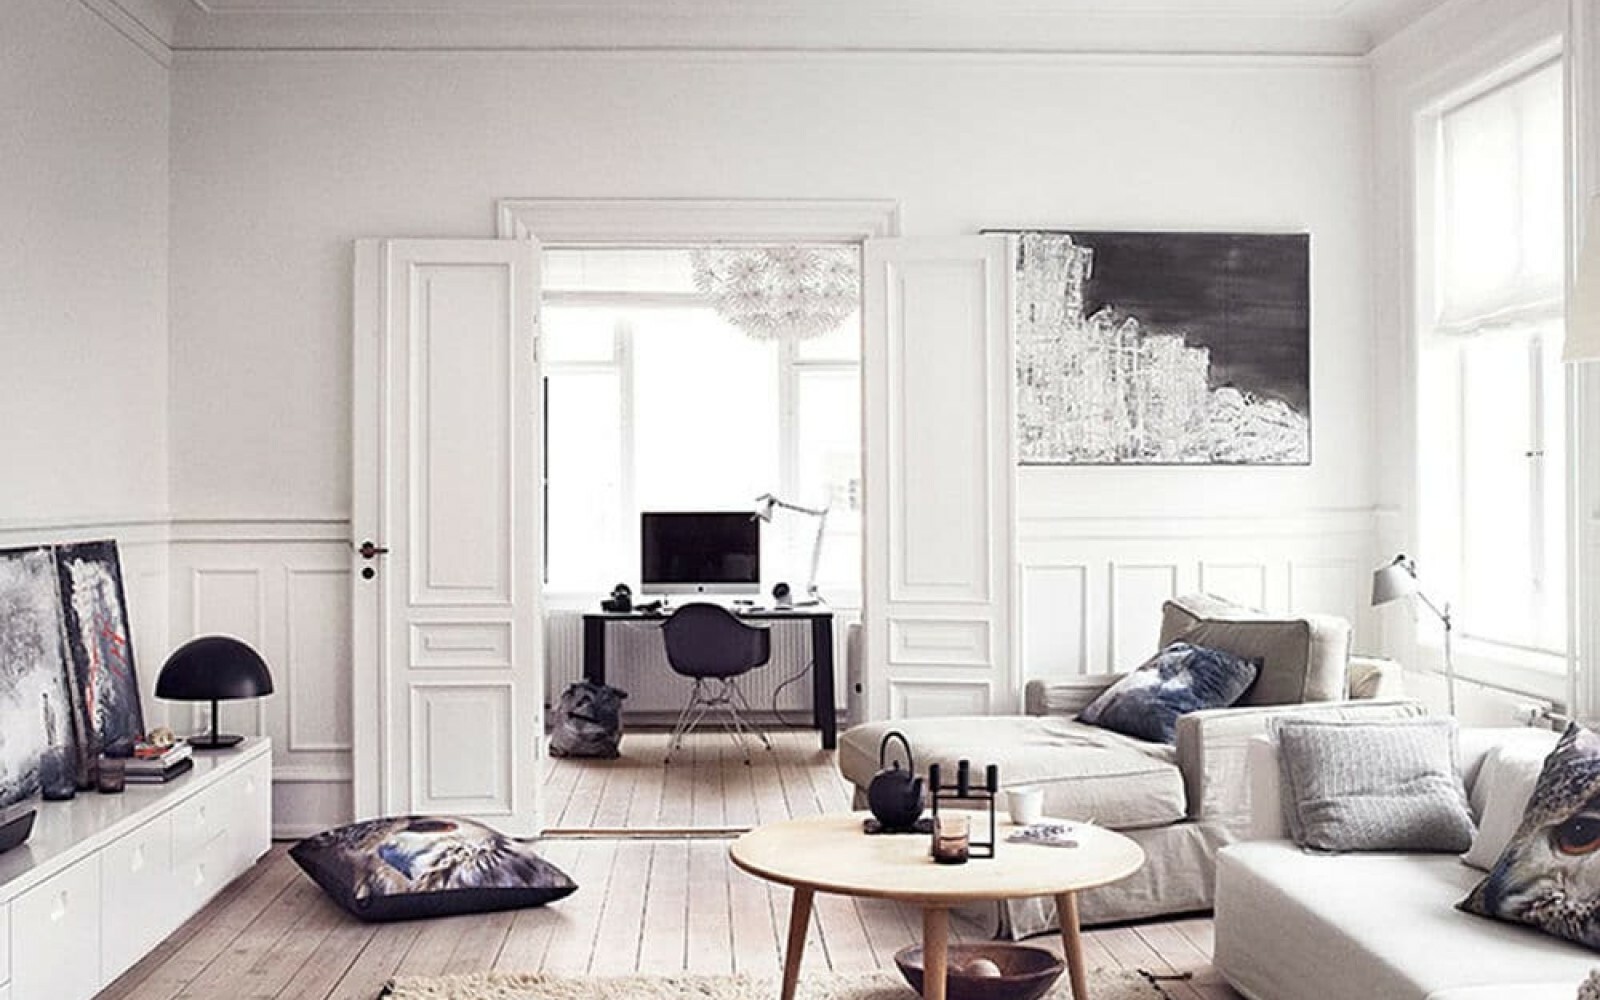 Instagram Interiors: 12 Stunning Examples of Vitra in the Home